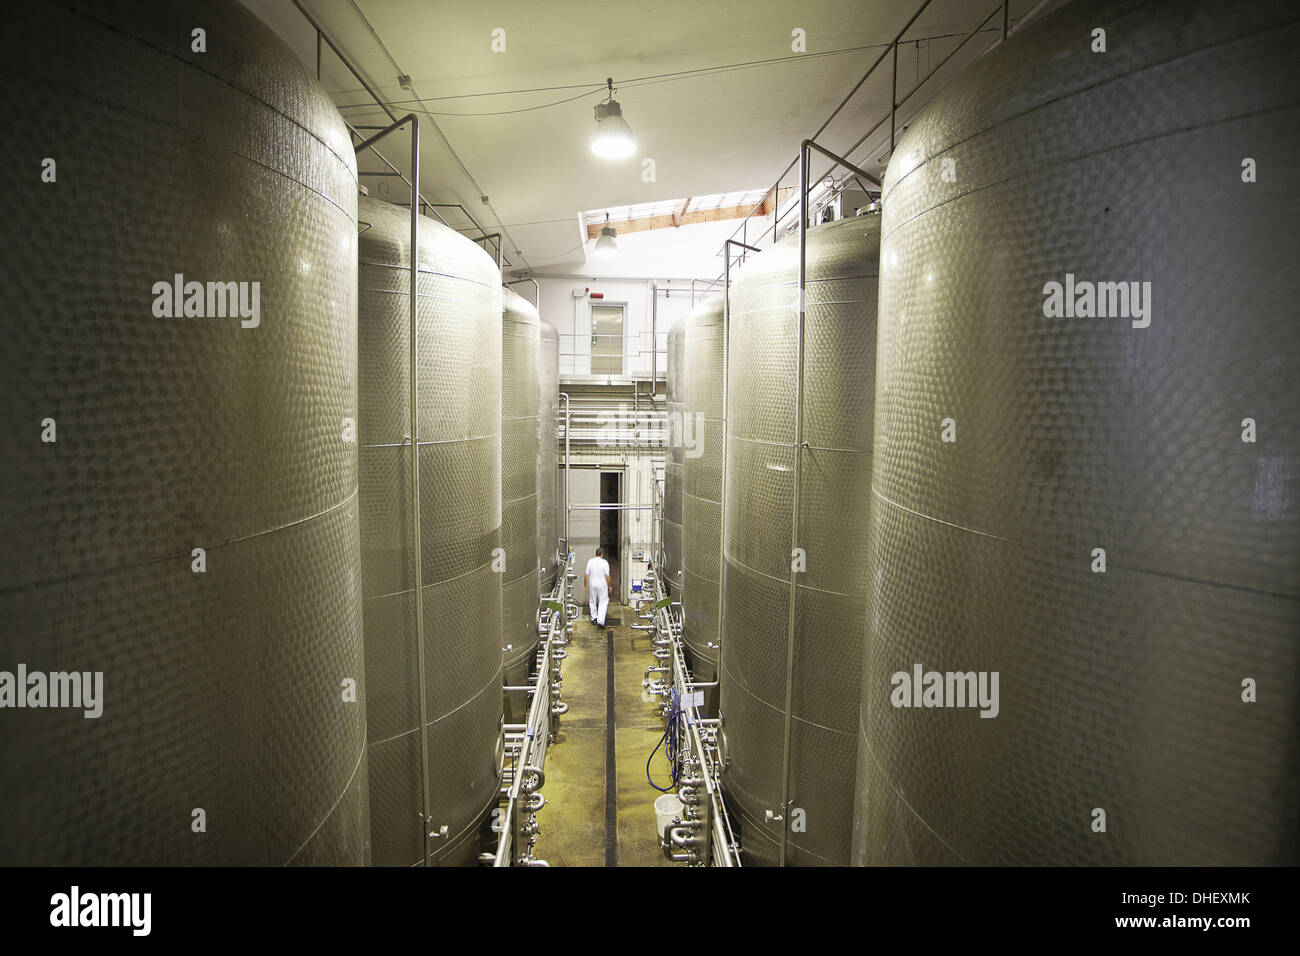 Large tanks in a brewery Stock Photo